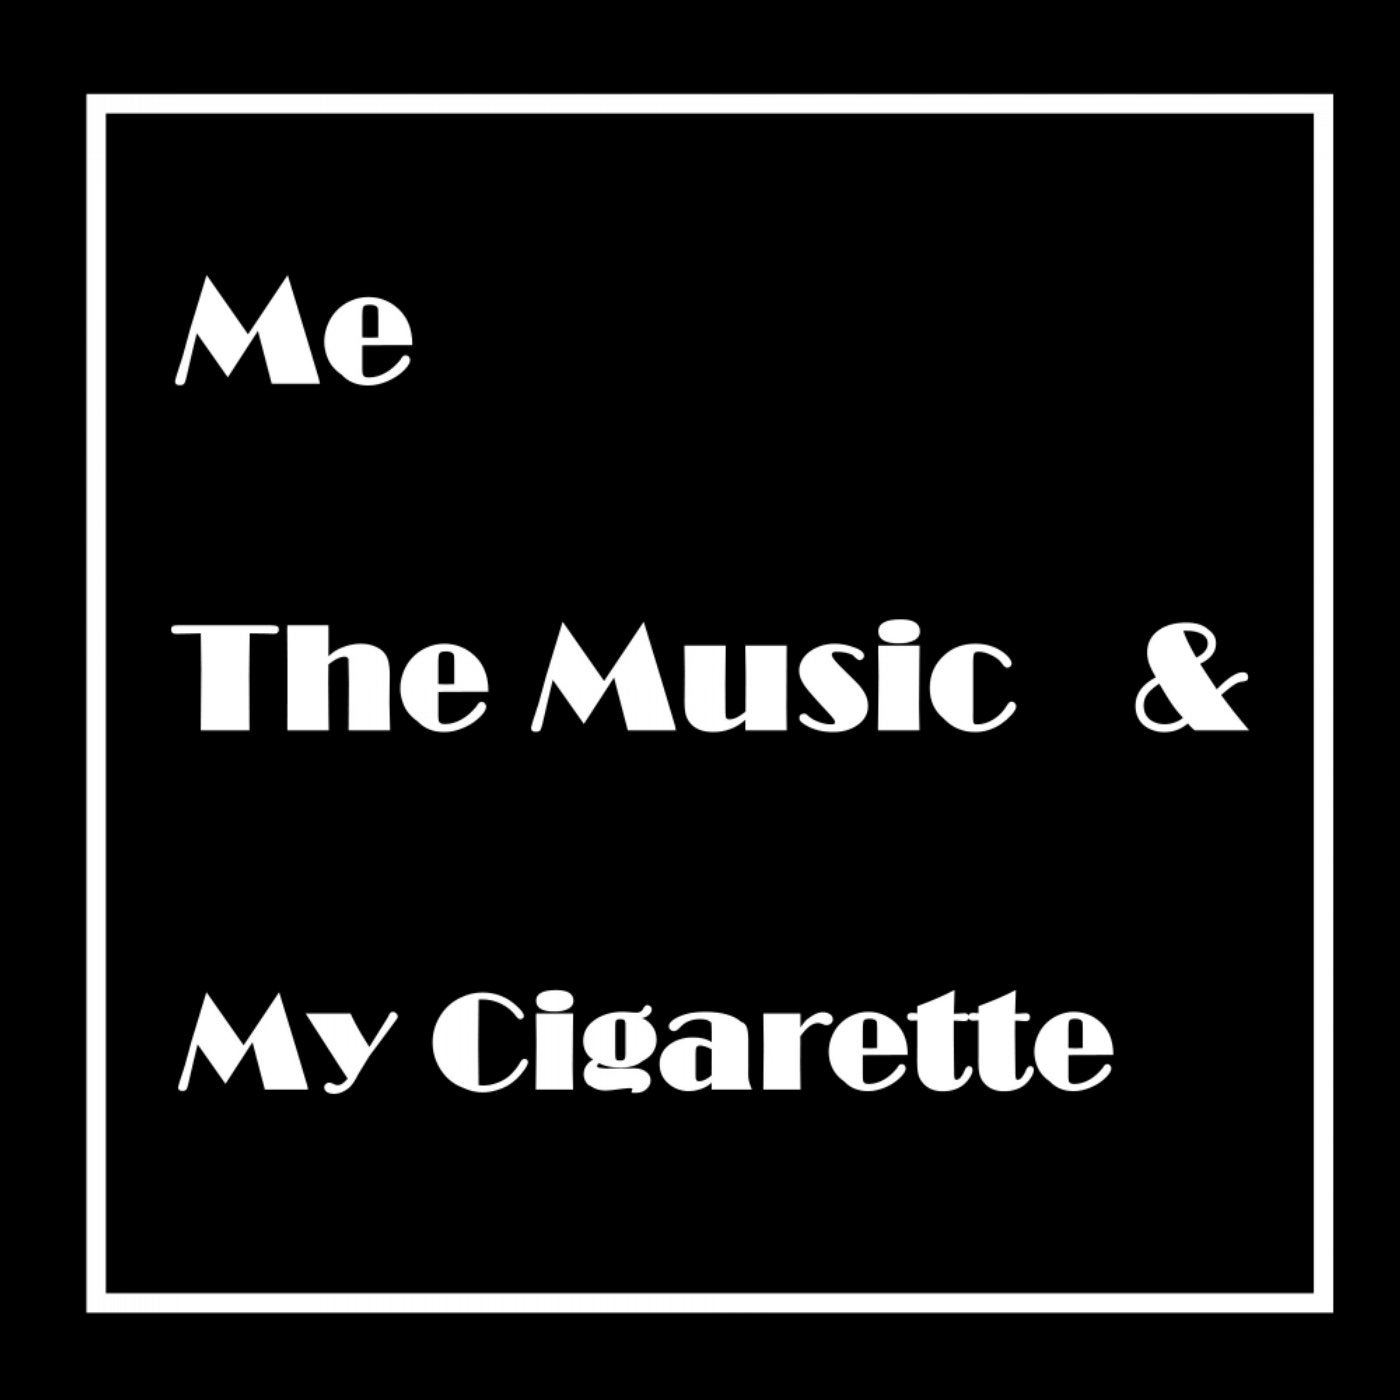 Me, The Music & My Cigarette EP